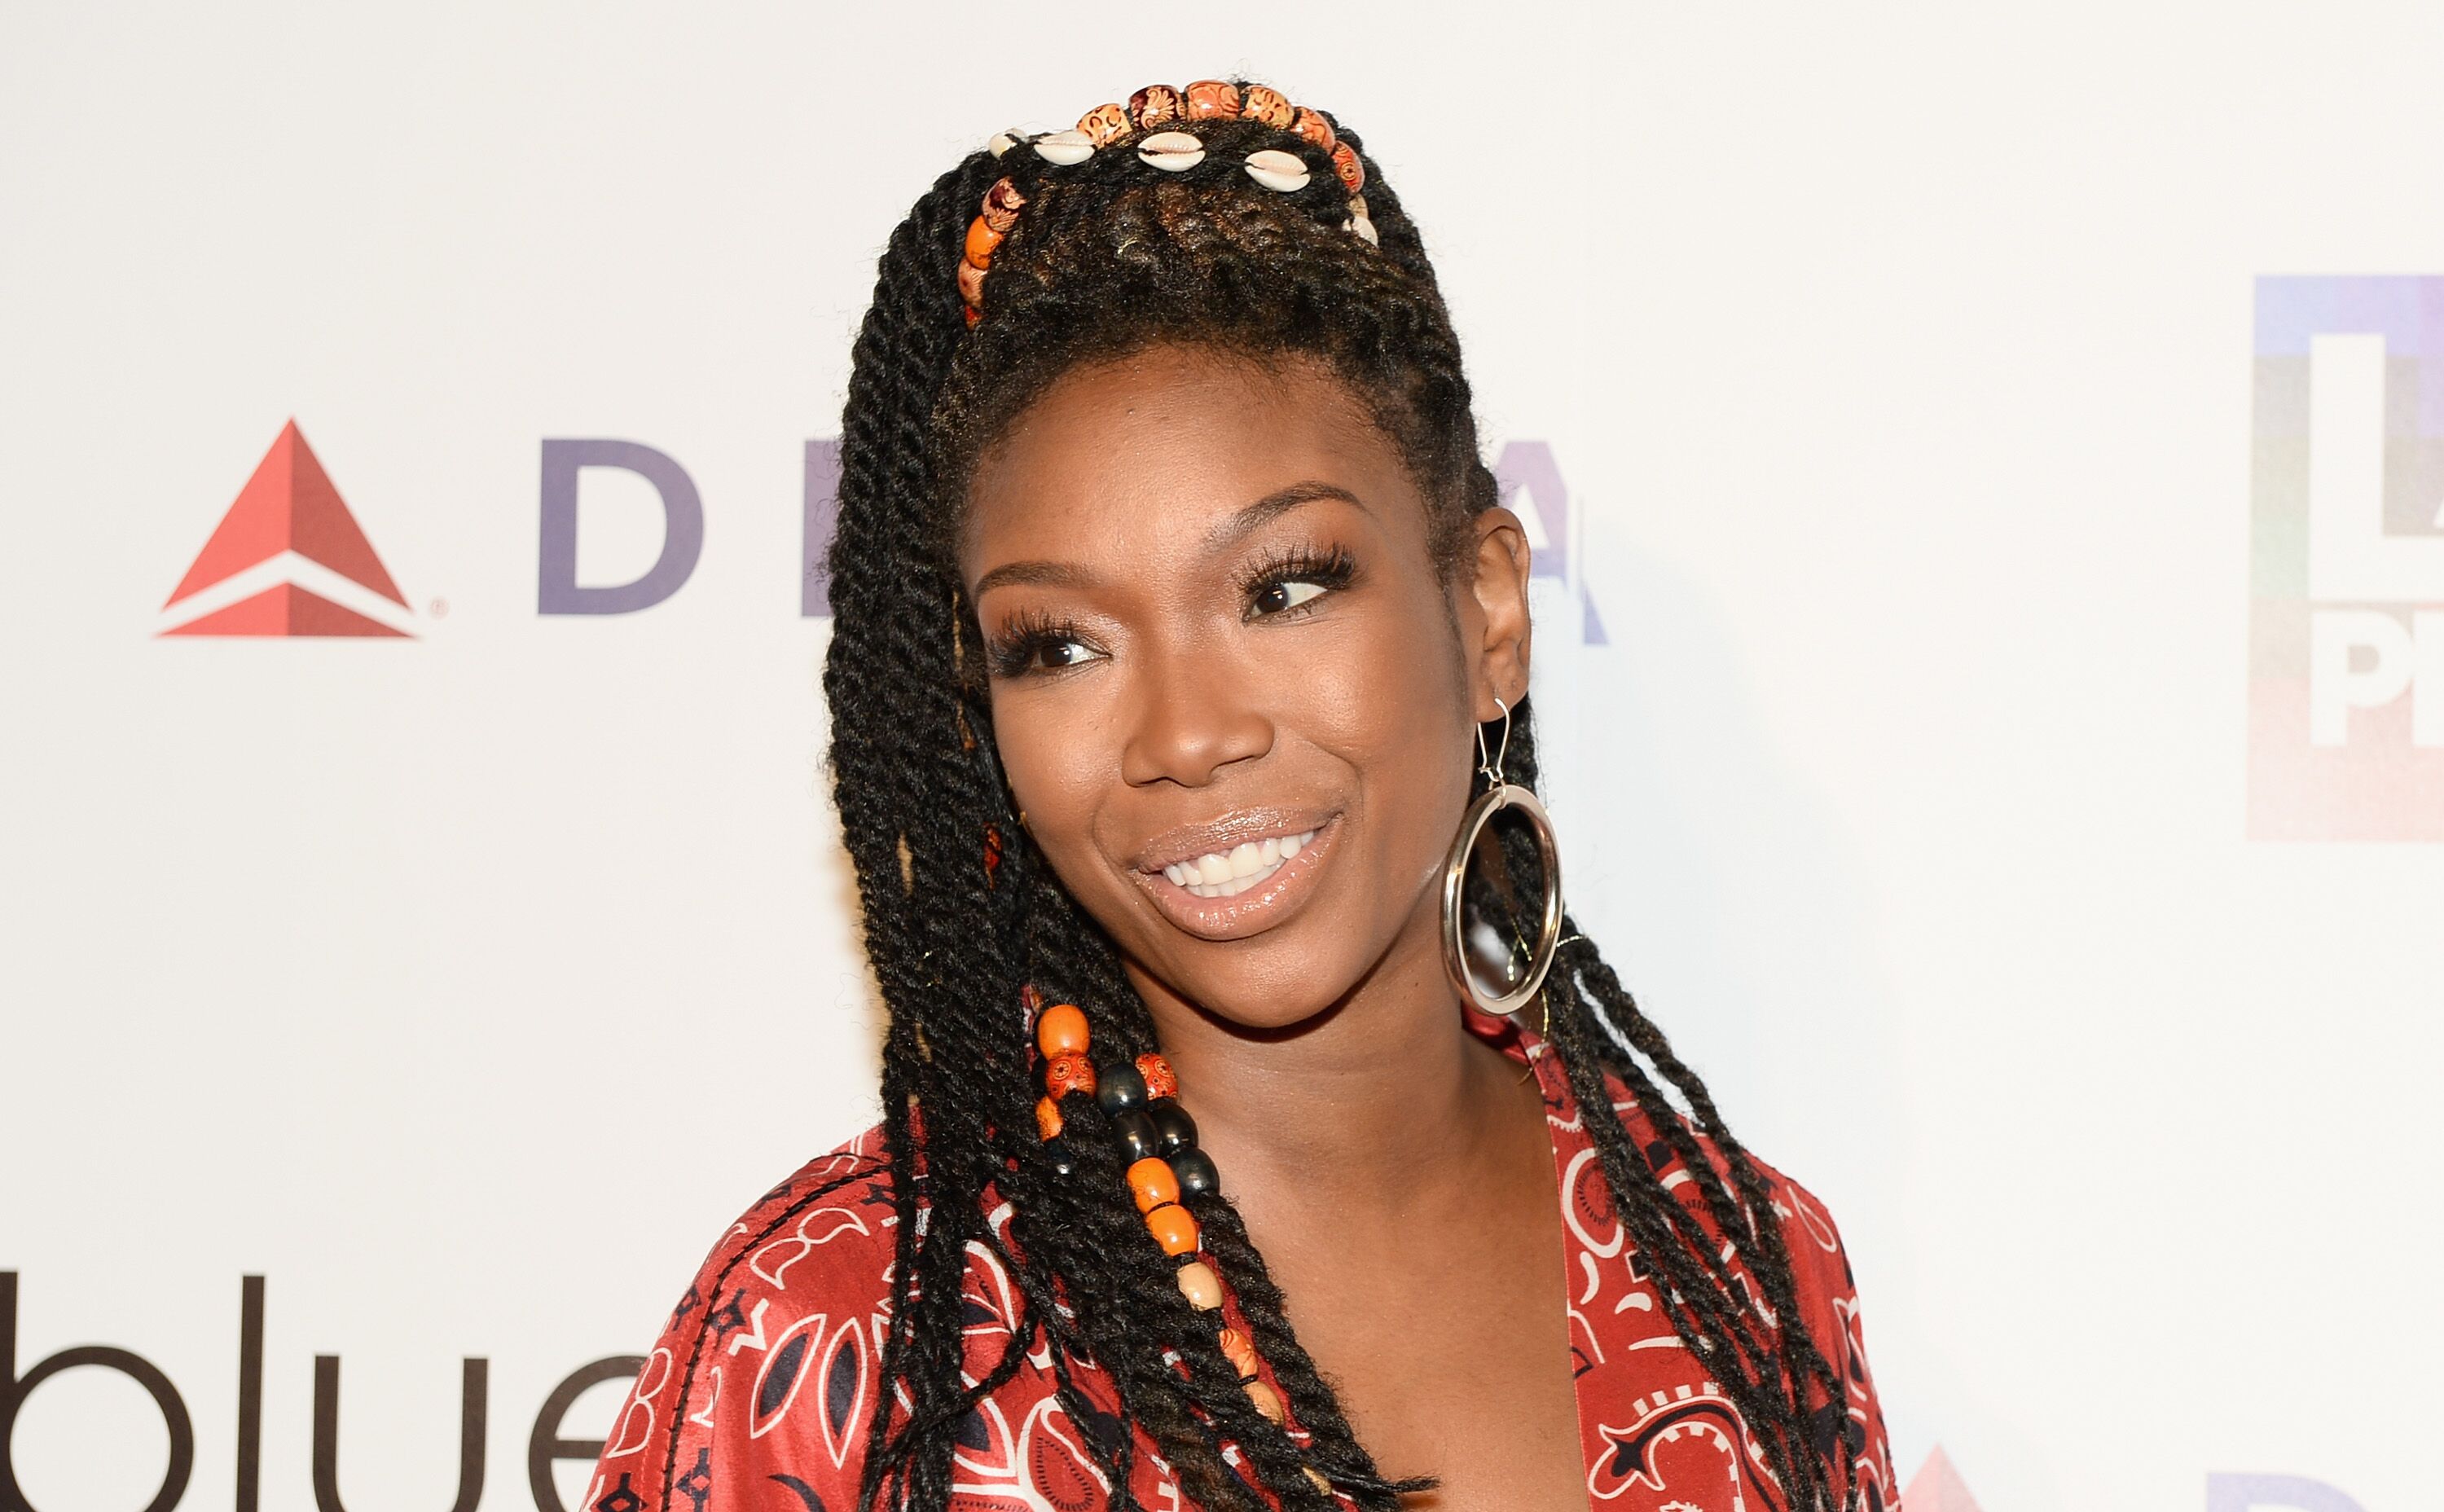 Brandy Norwood attends the LA Pride Music Festival and Parade 2017. | Source: Getty Images